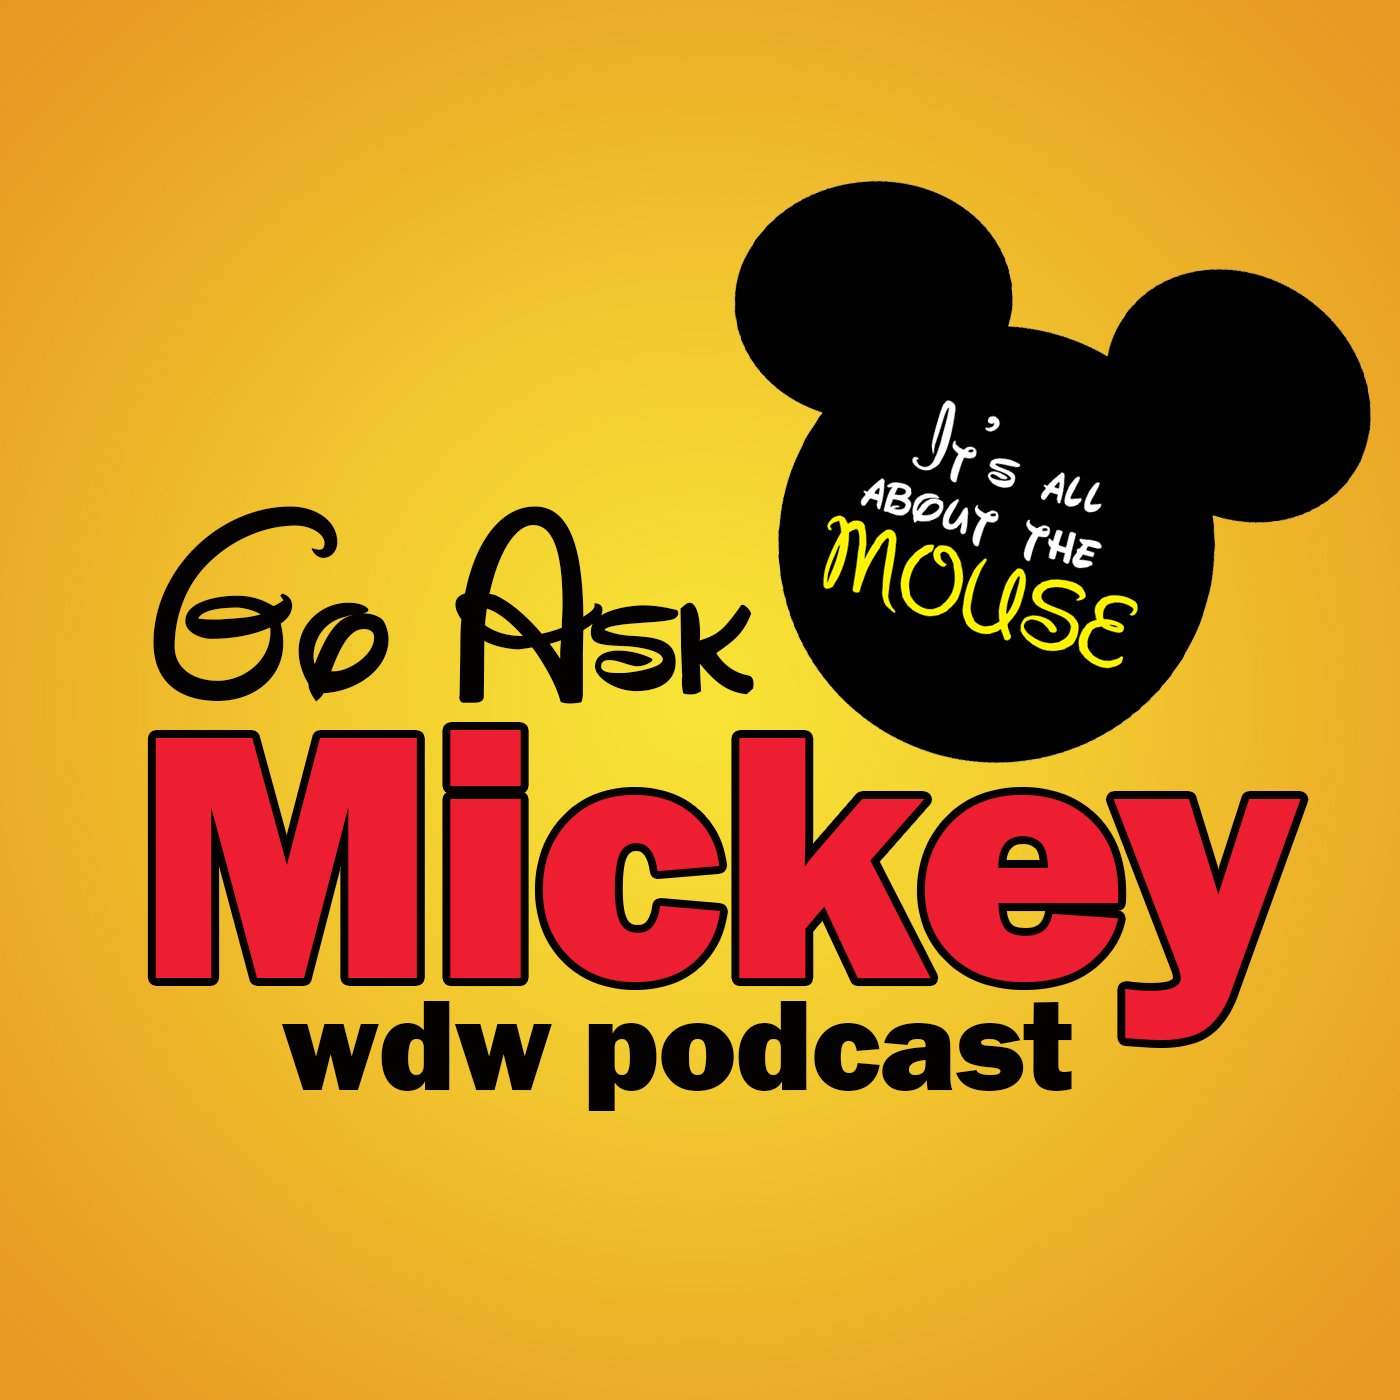 WDW news and information Podcast.🤘